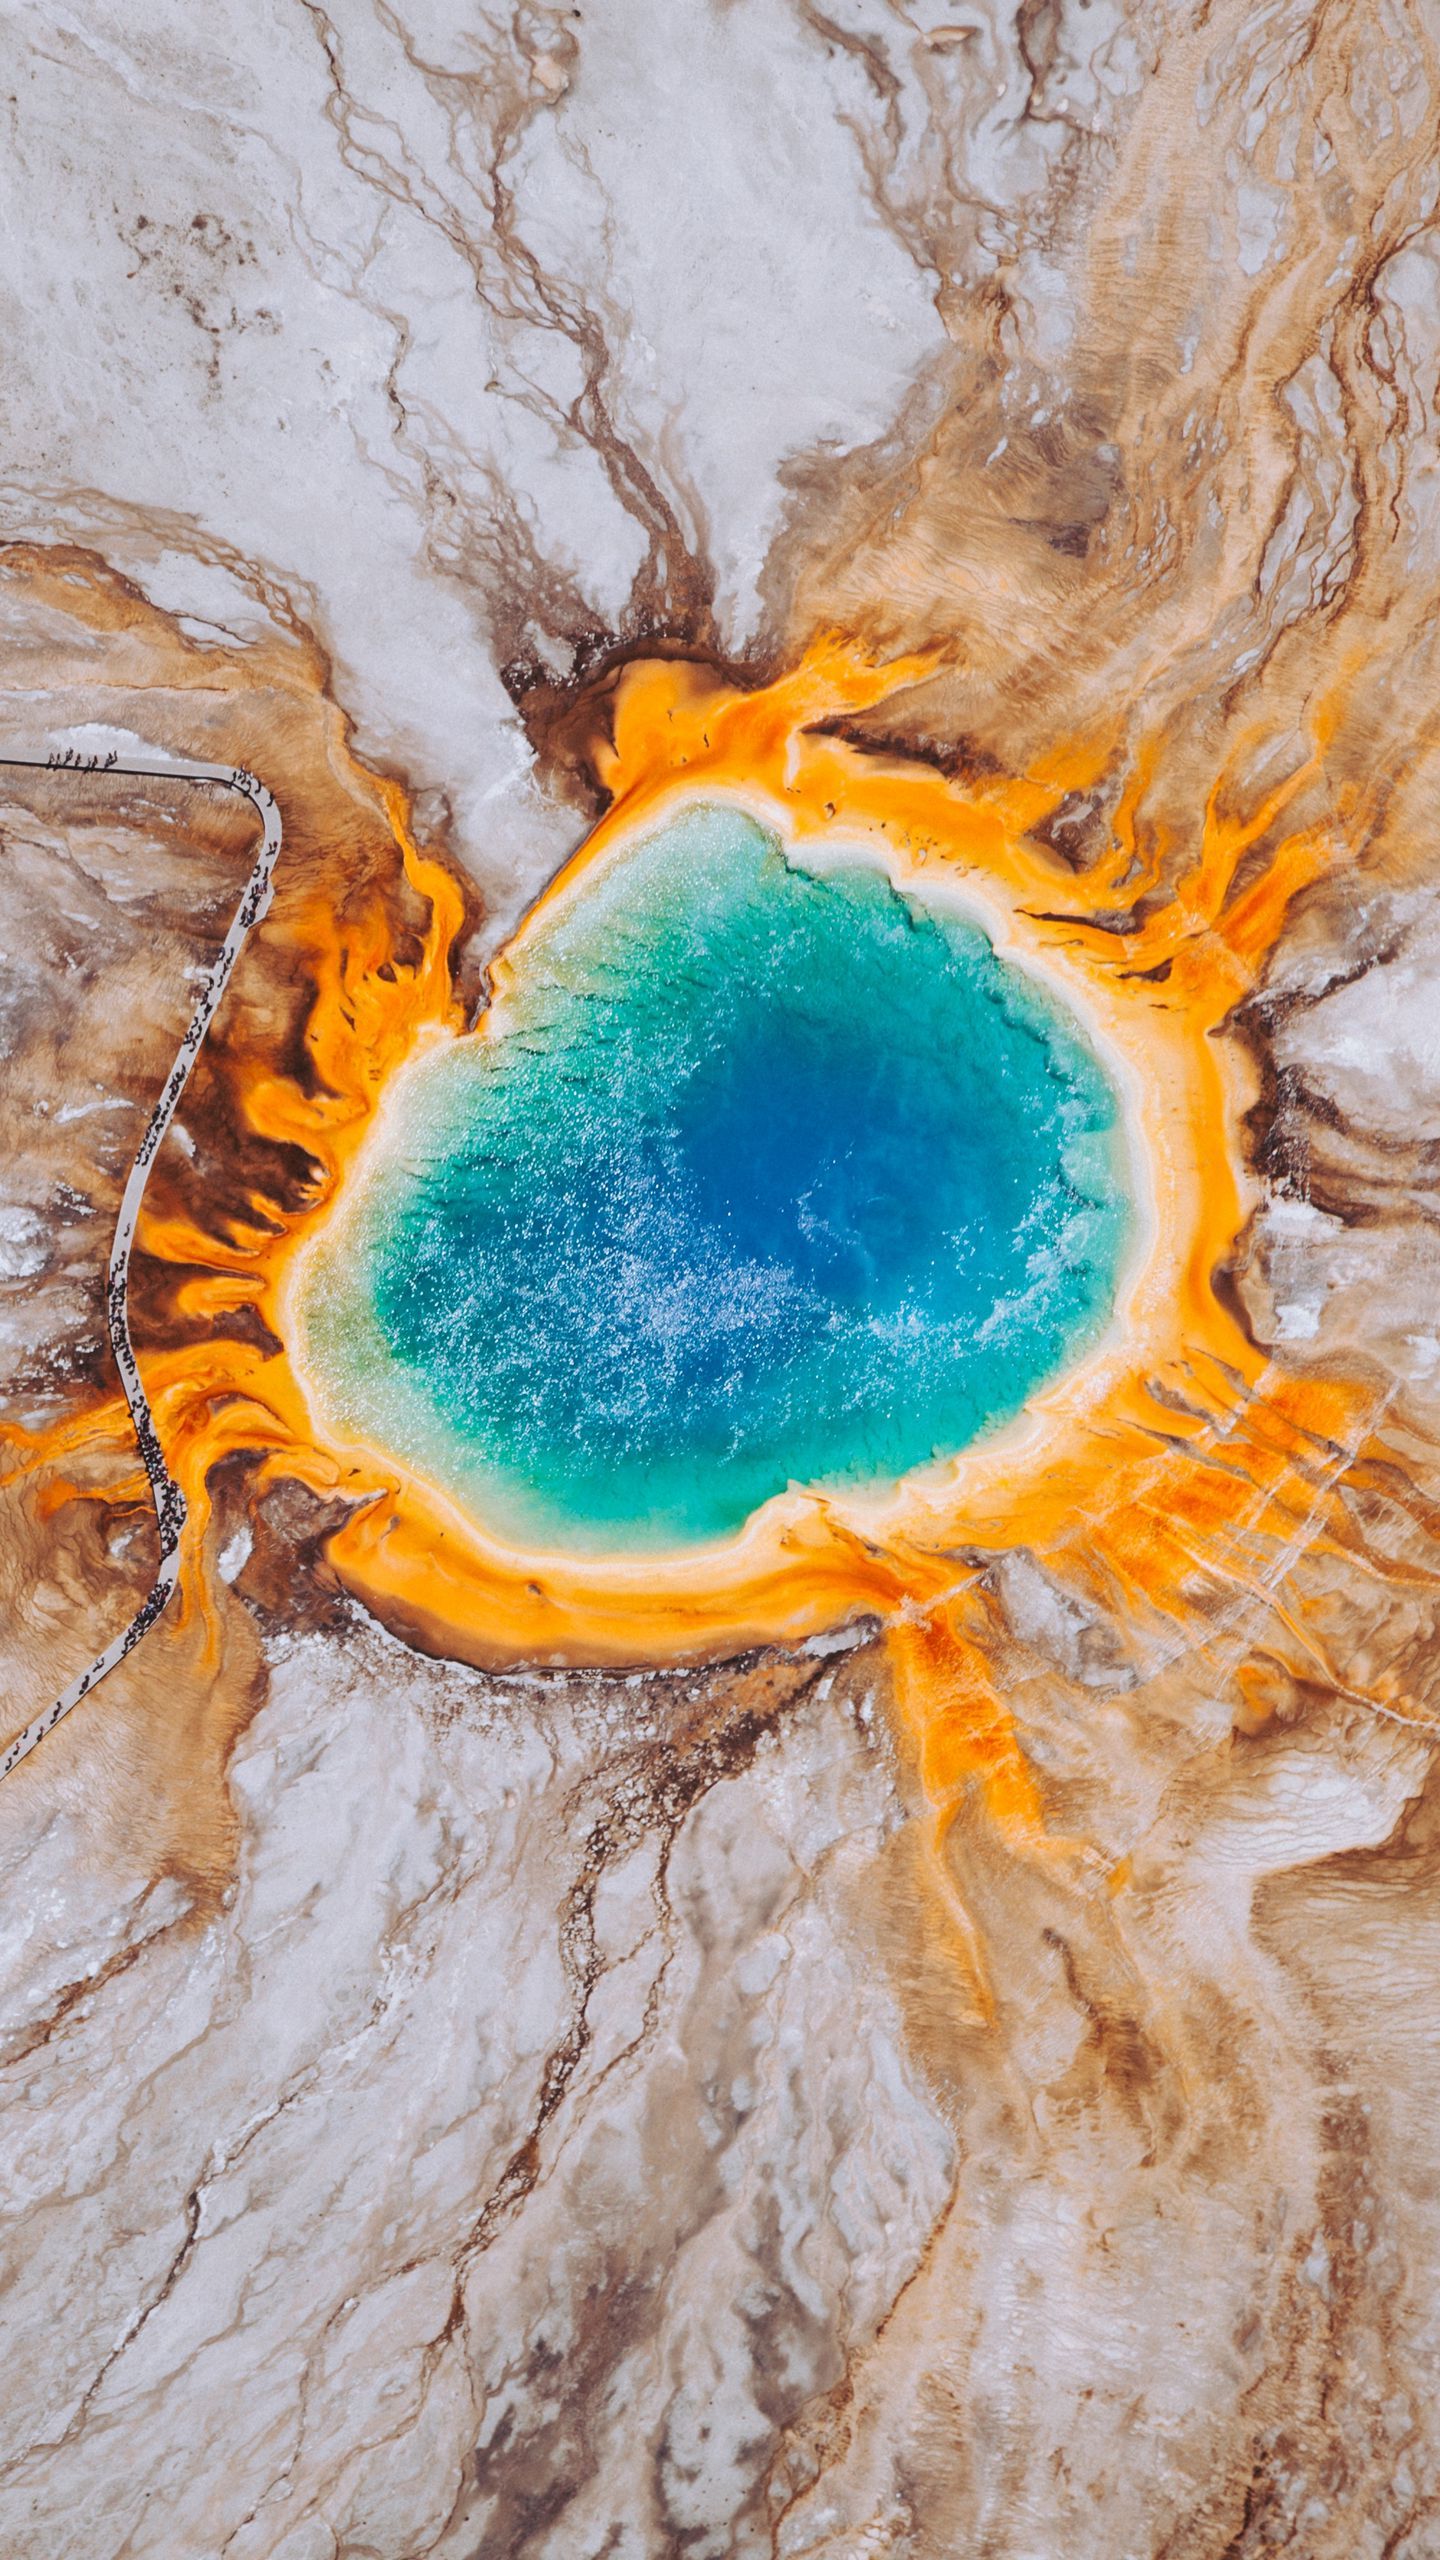 Download wallpaper 1440x2560 grand prismatic spring, surface